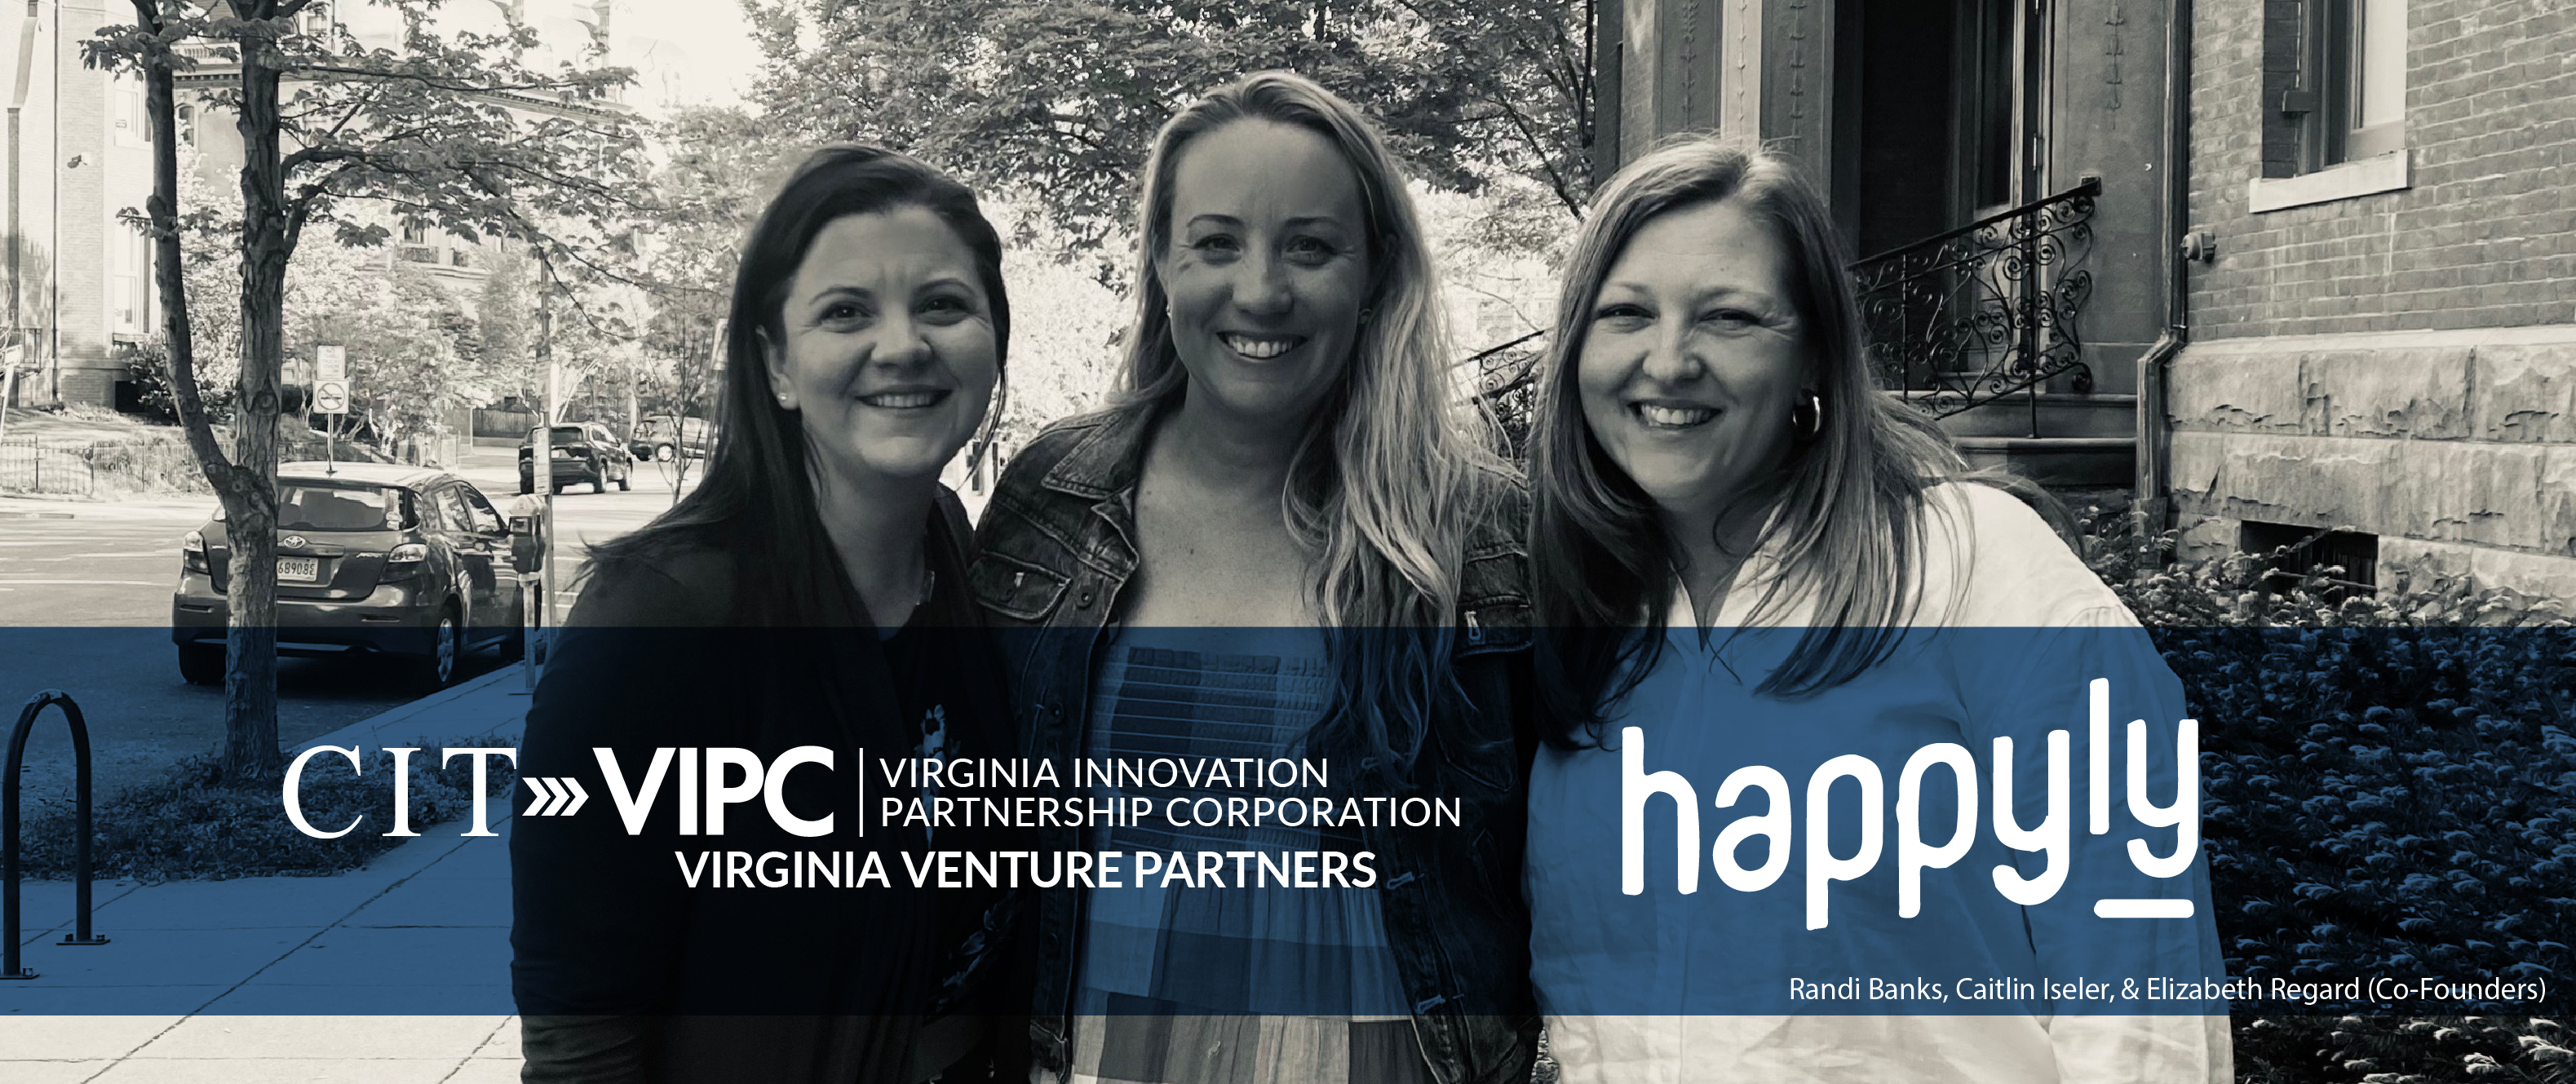 VIPC’s Virginia Venture Partners Invests in happyly to Support Working Parents with Wellness Solutions for Their Families